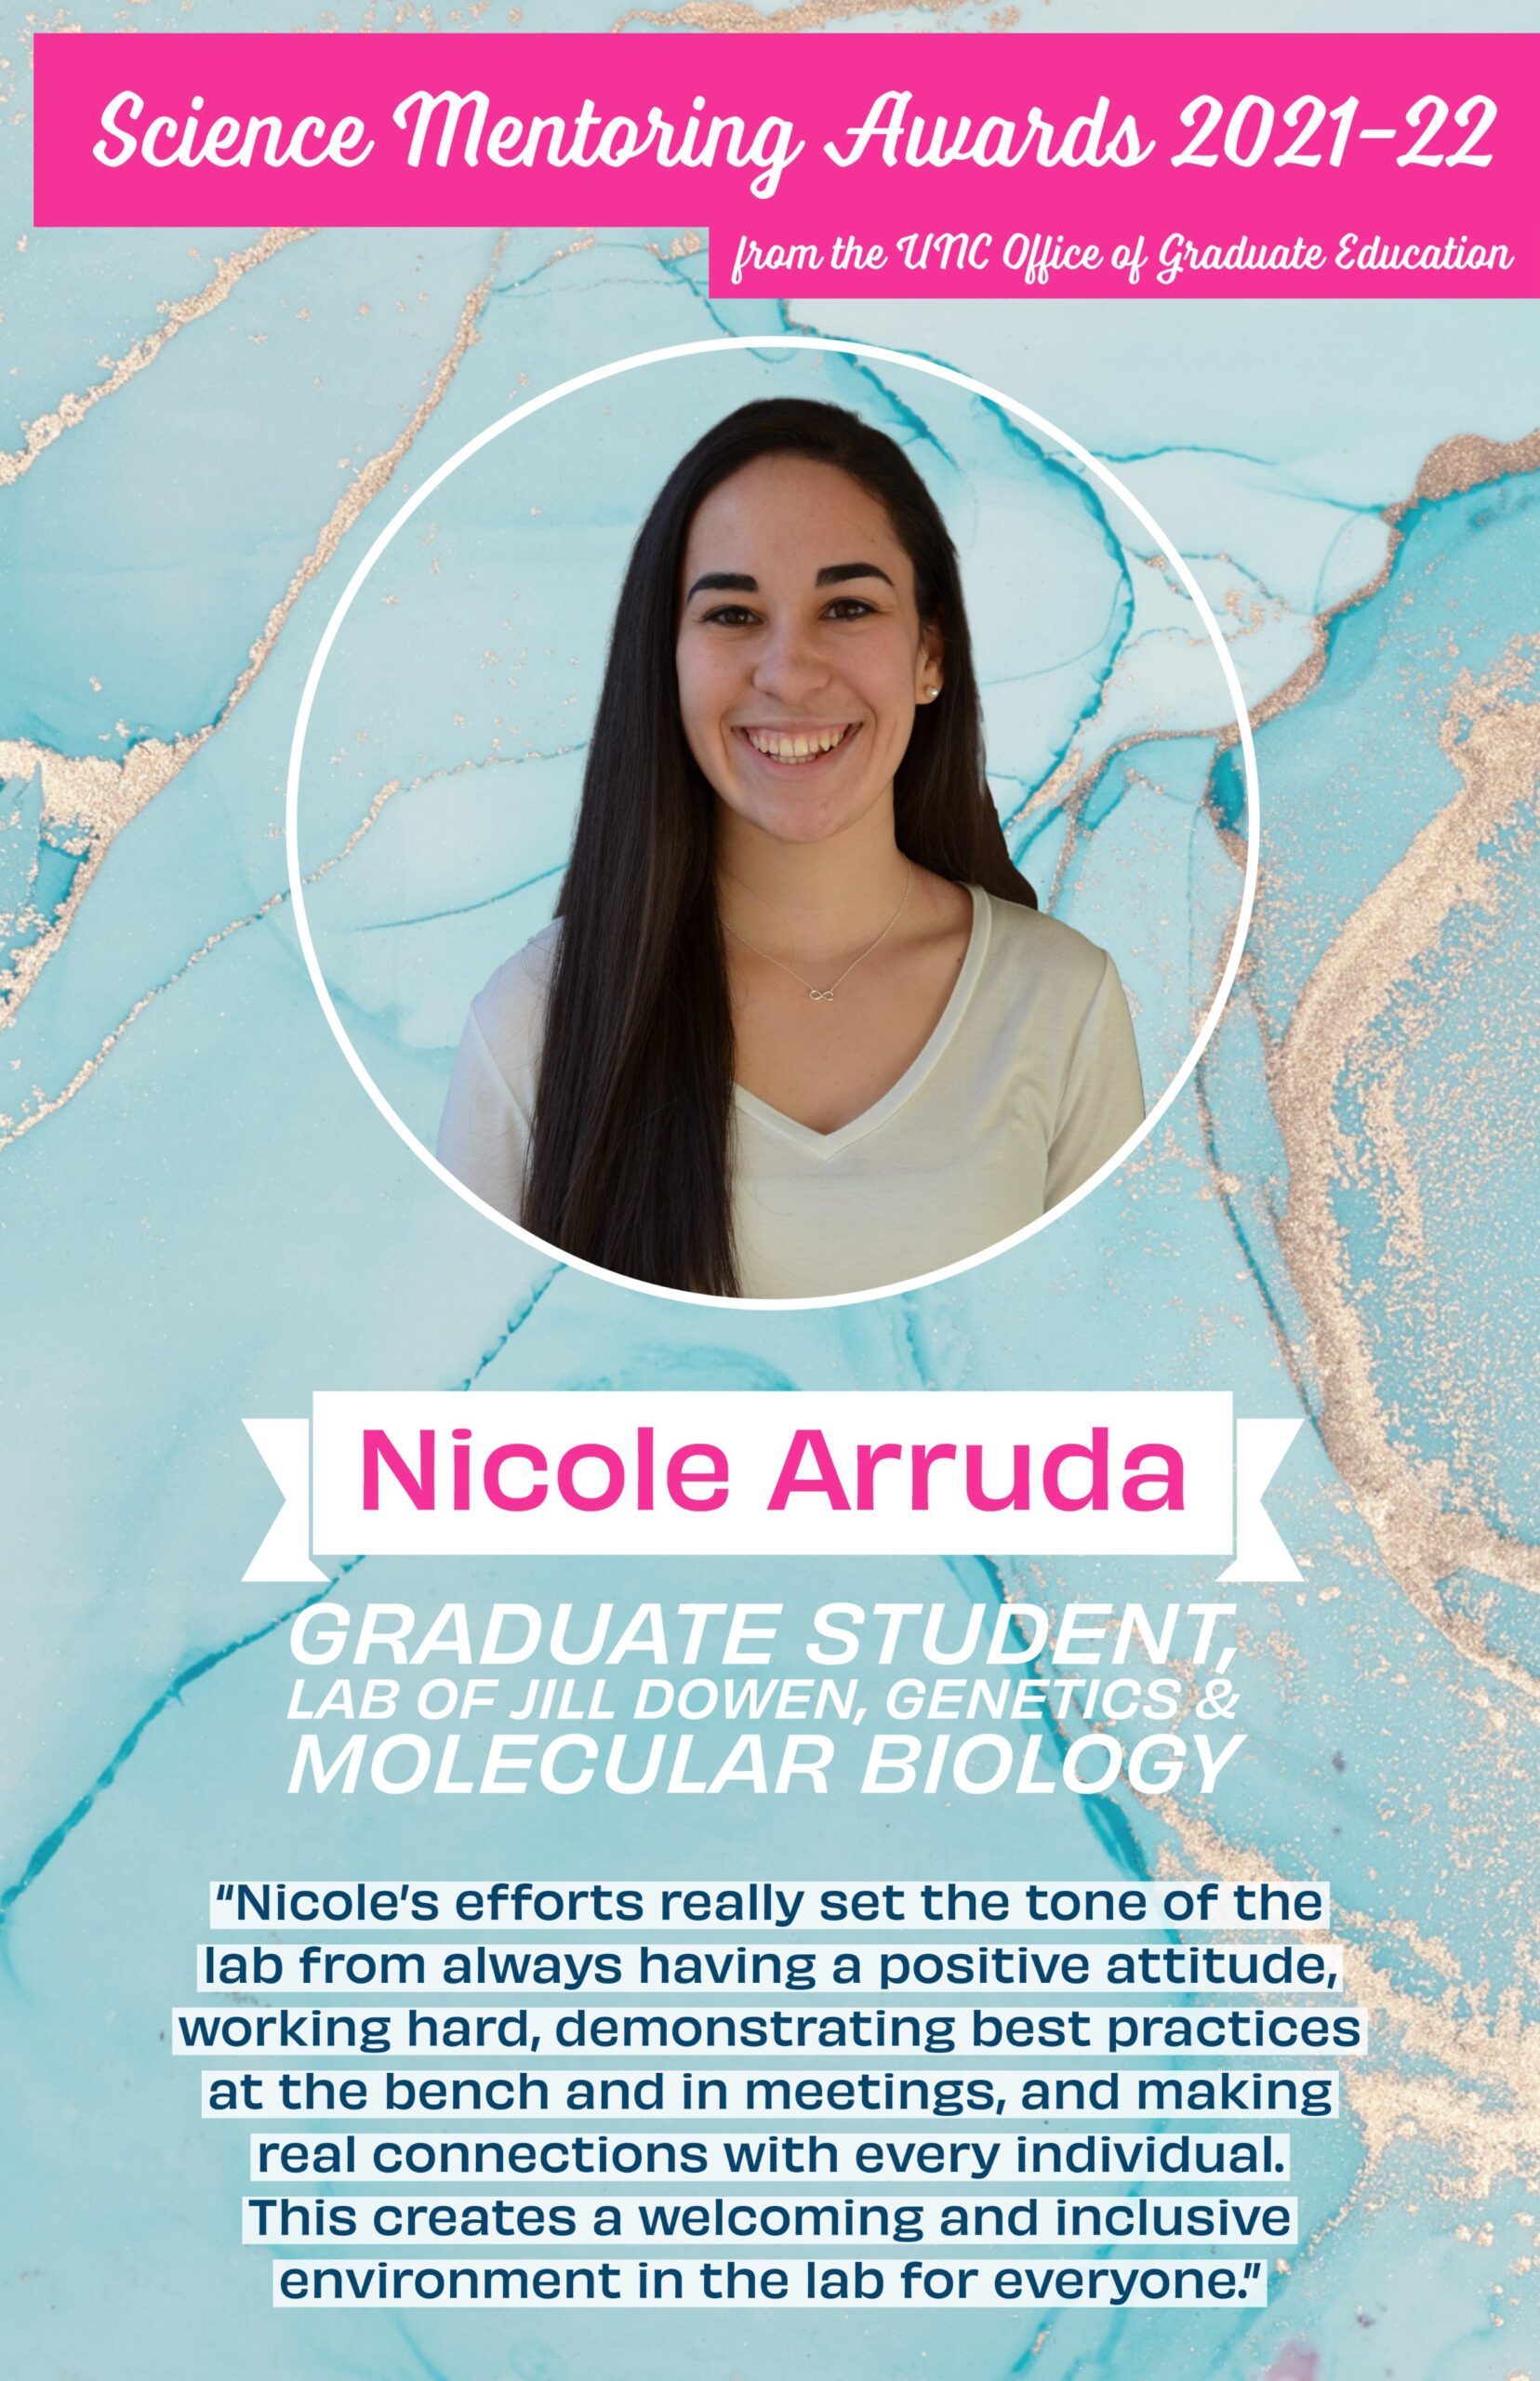 Science Mentoring Awards 2021-22, Congratulations to Nicole Arruda grad student in Jill Dowen's lab, Nicoles efforts really set the tone of the lab from always having a positive attitude, working hard, demonstrating best practices at the bench and in meetings, and making real connections with every individual. This creates a welcoming and inclusive environment in the lab for everyone. image of Nicole on blue backdrop